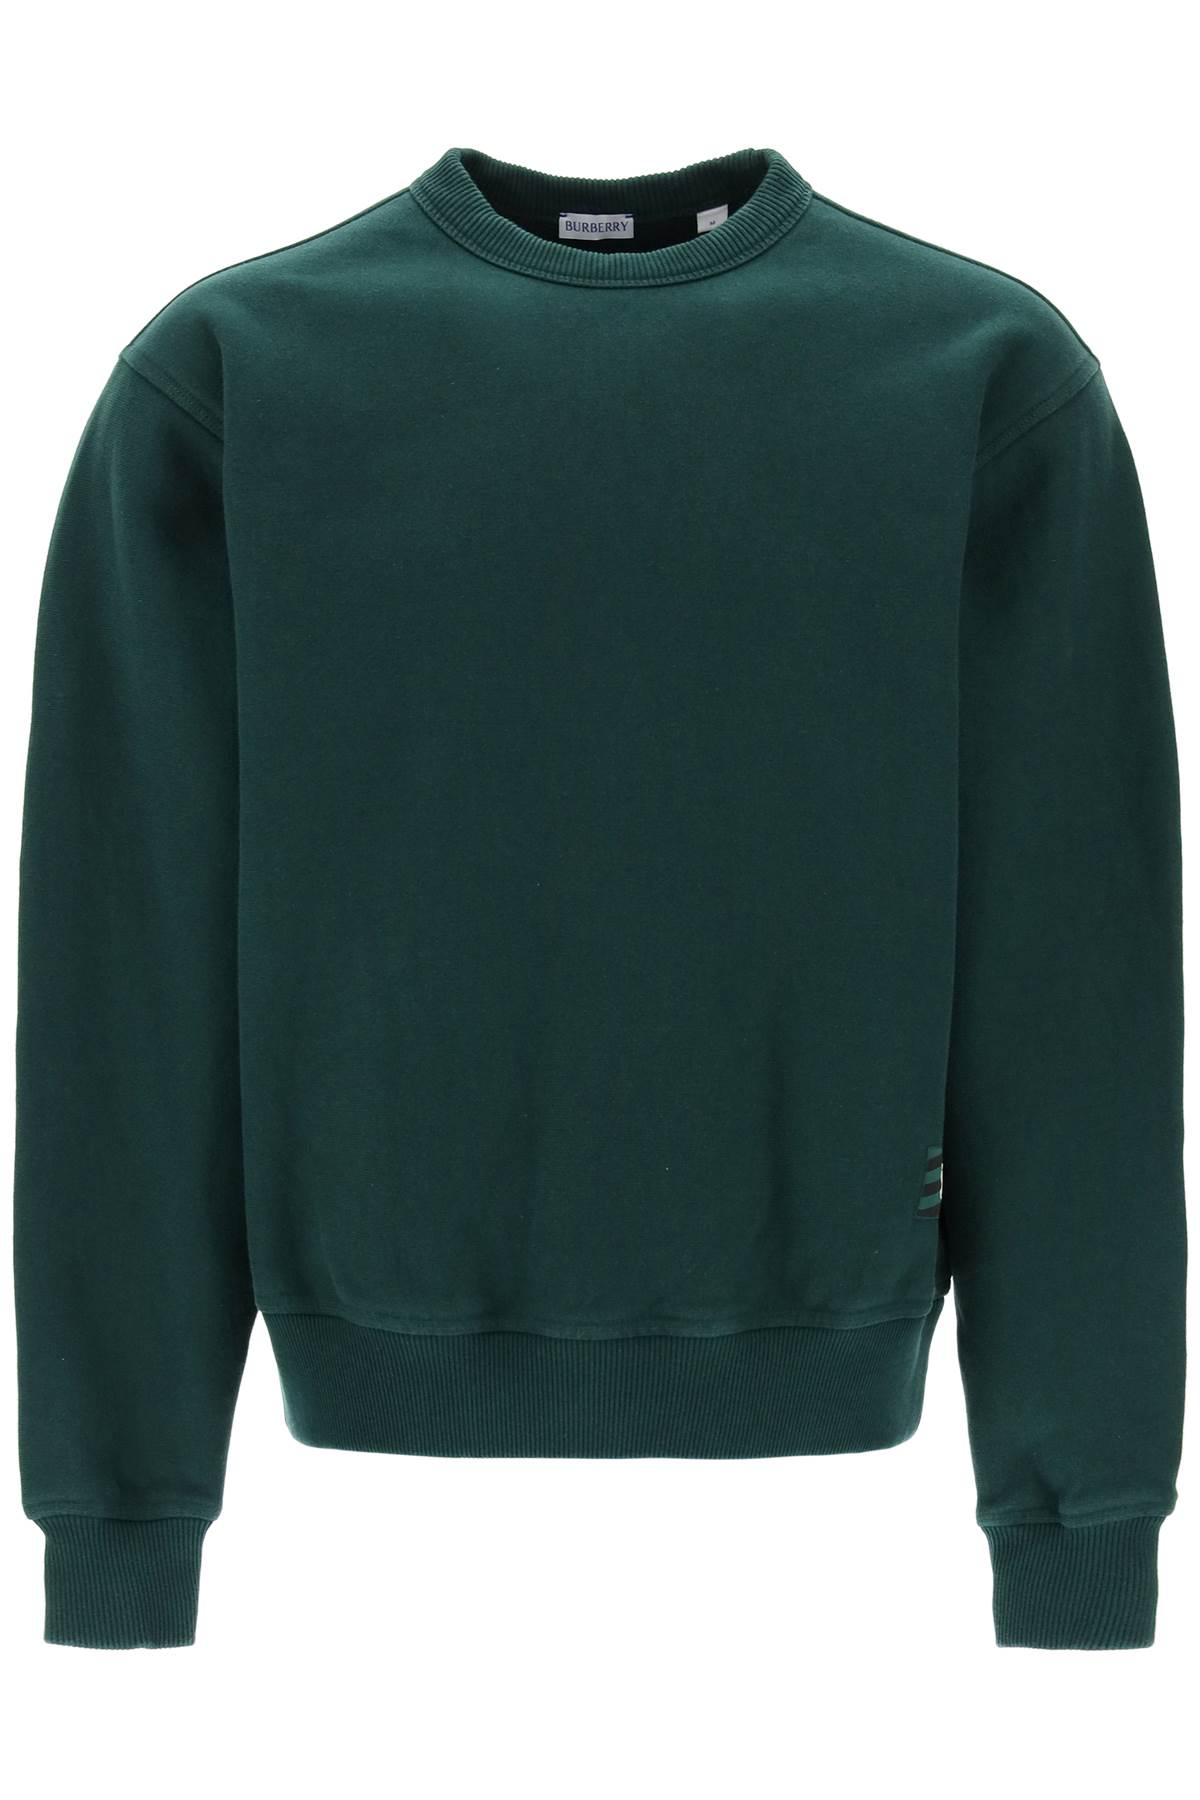 Shop Burberry Oversized Crewneck In Green